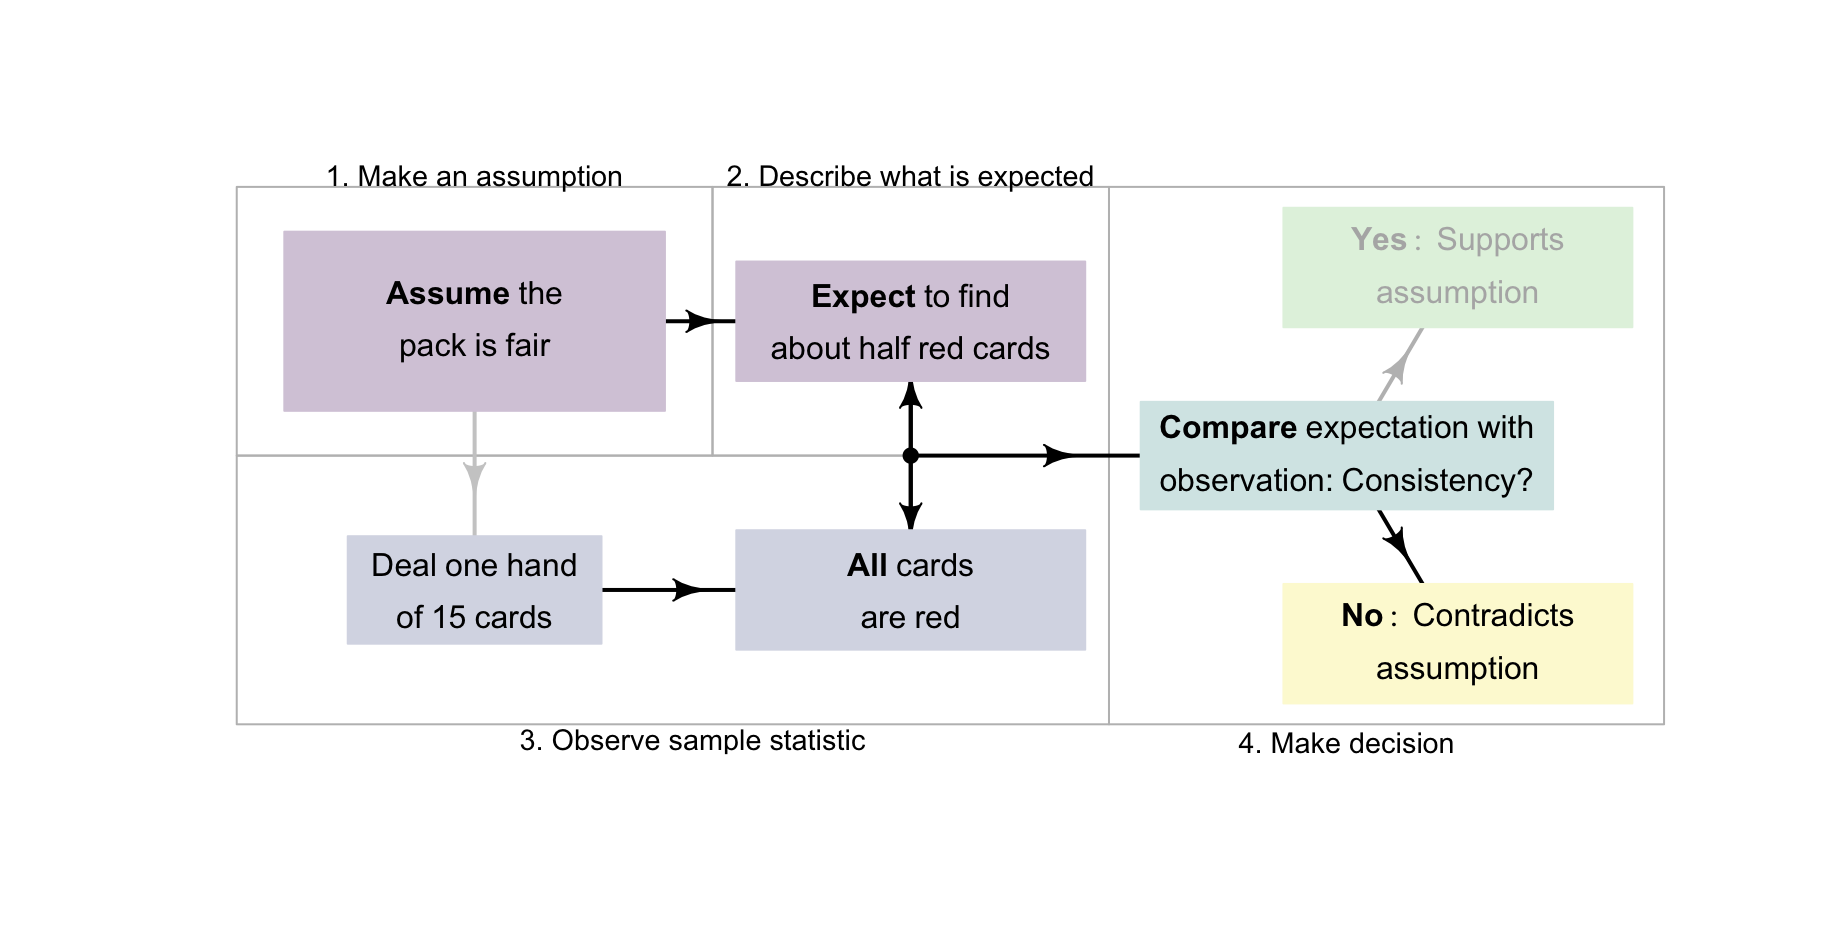 A way to make decisions for the cards example